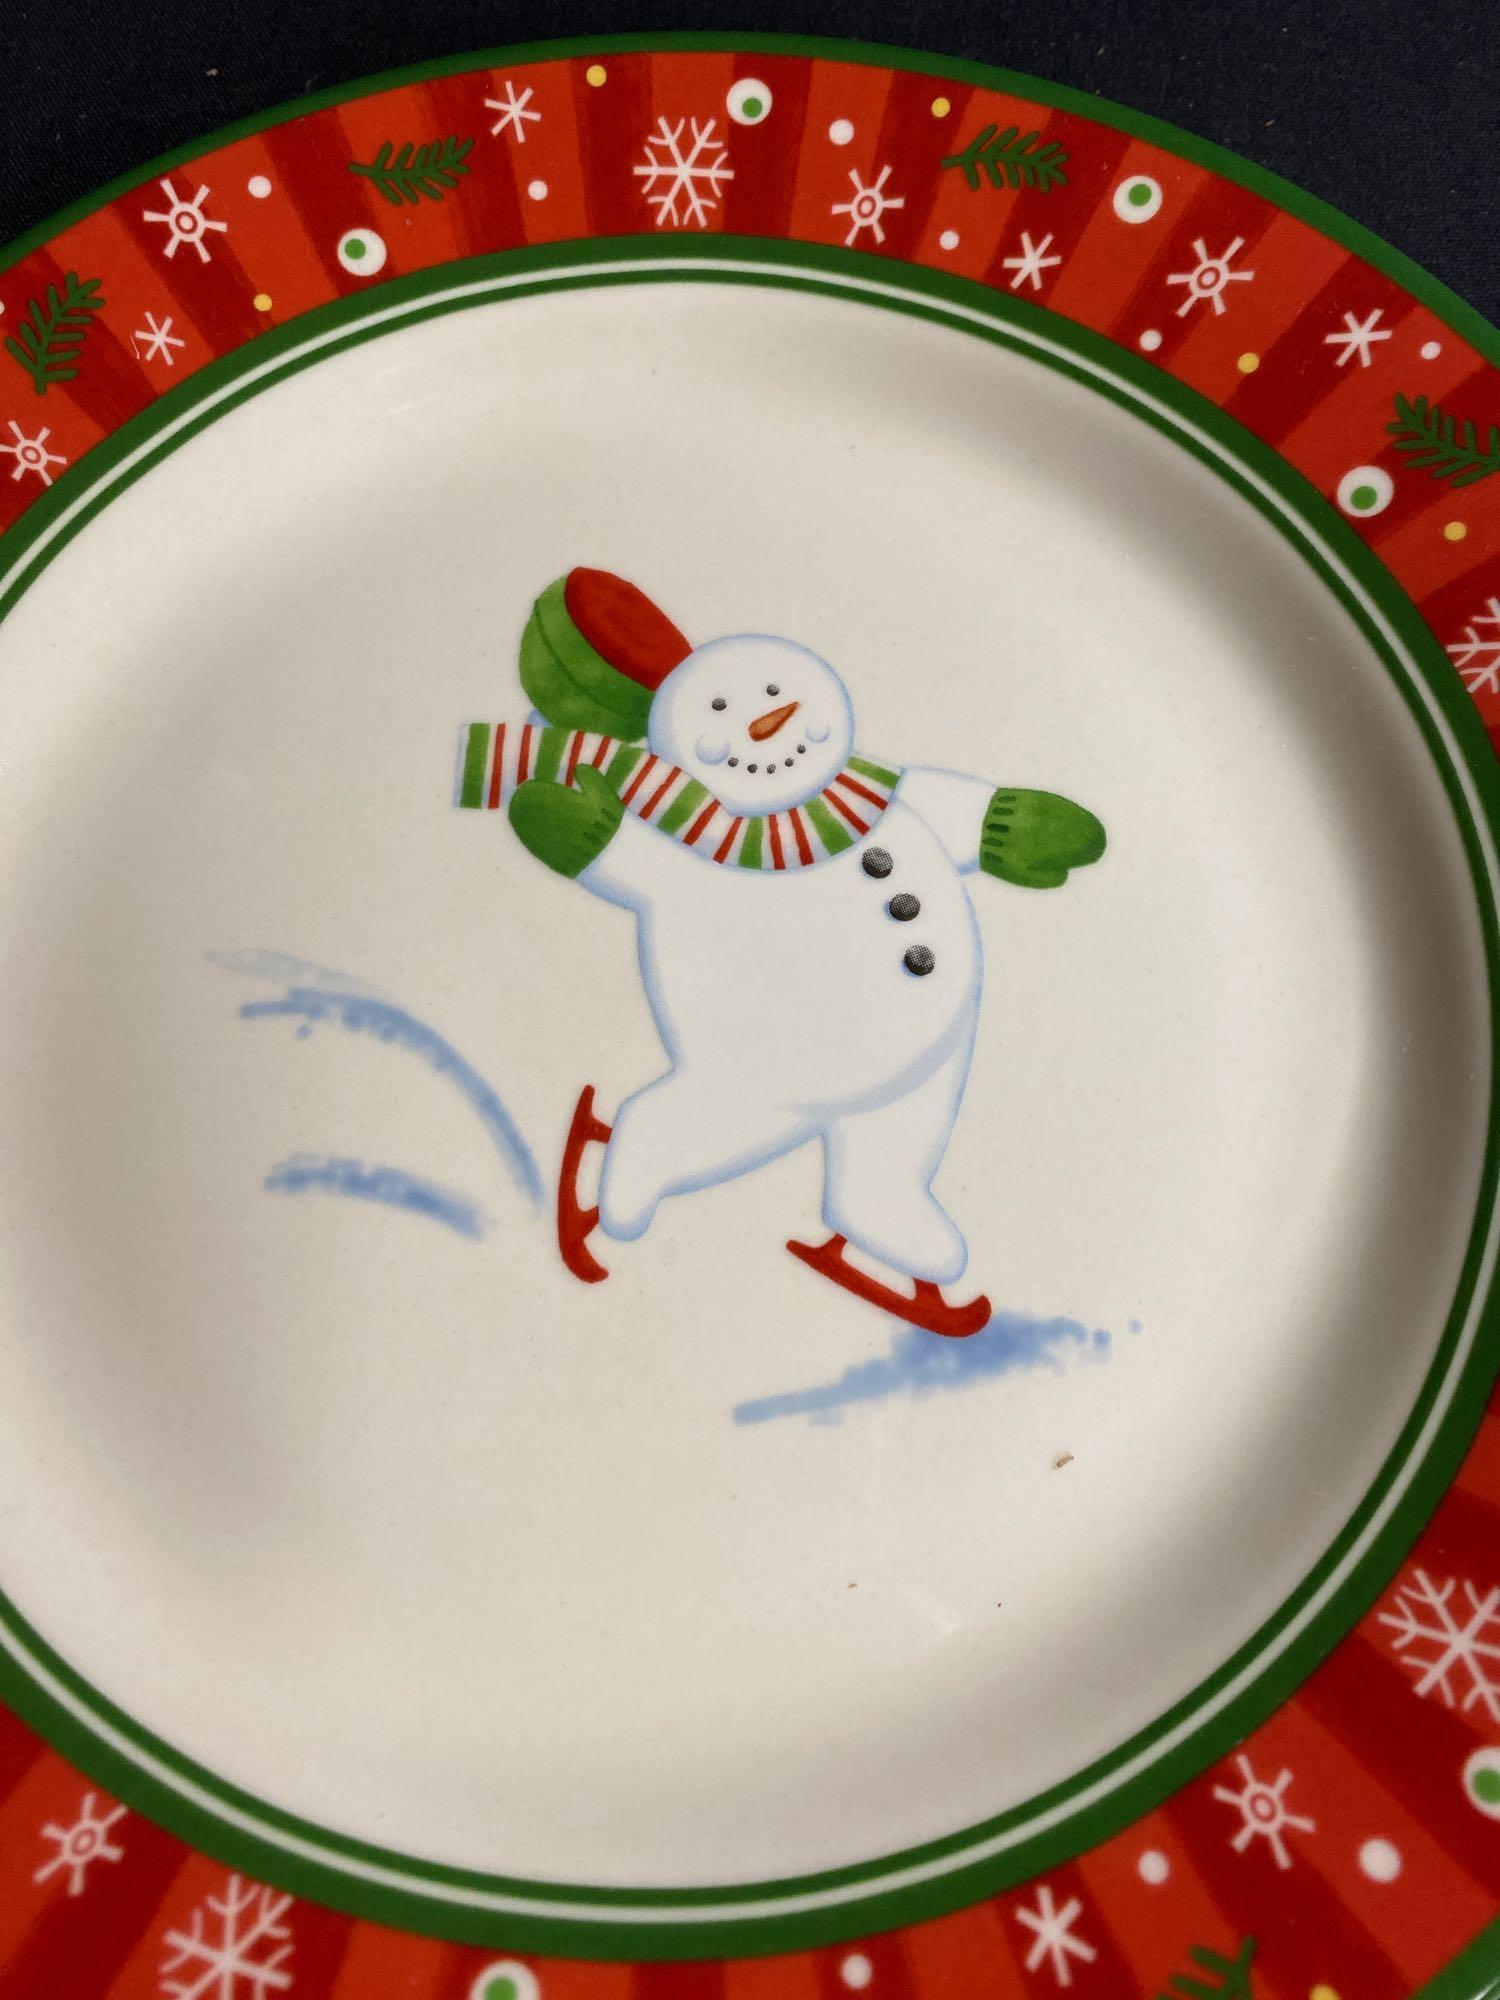 Longaberger holiday snack plates and bowl